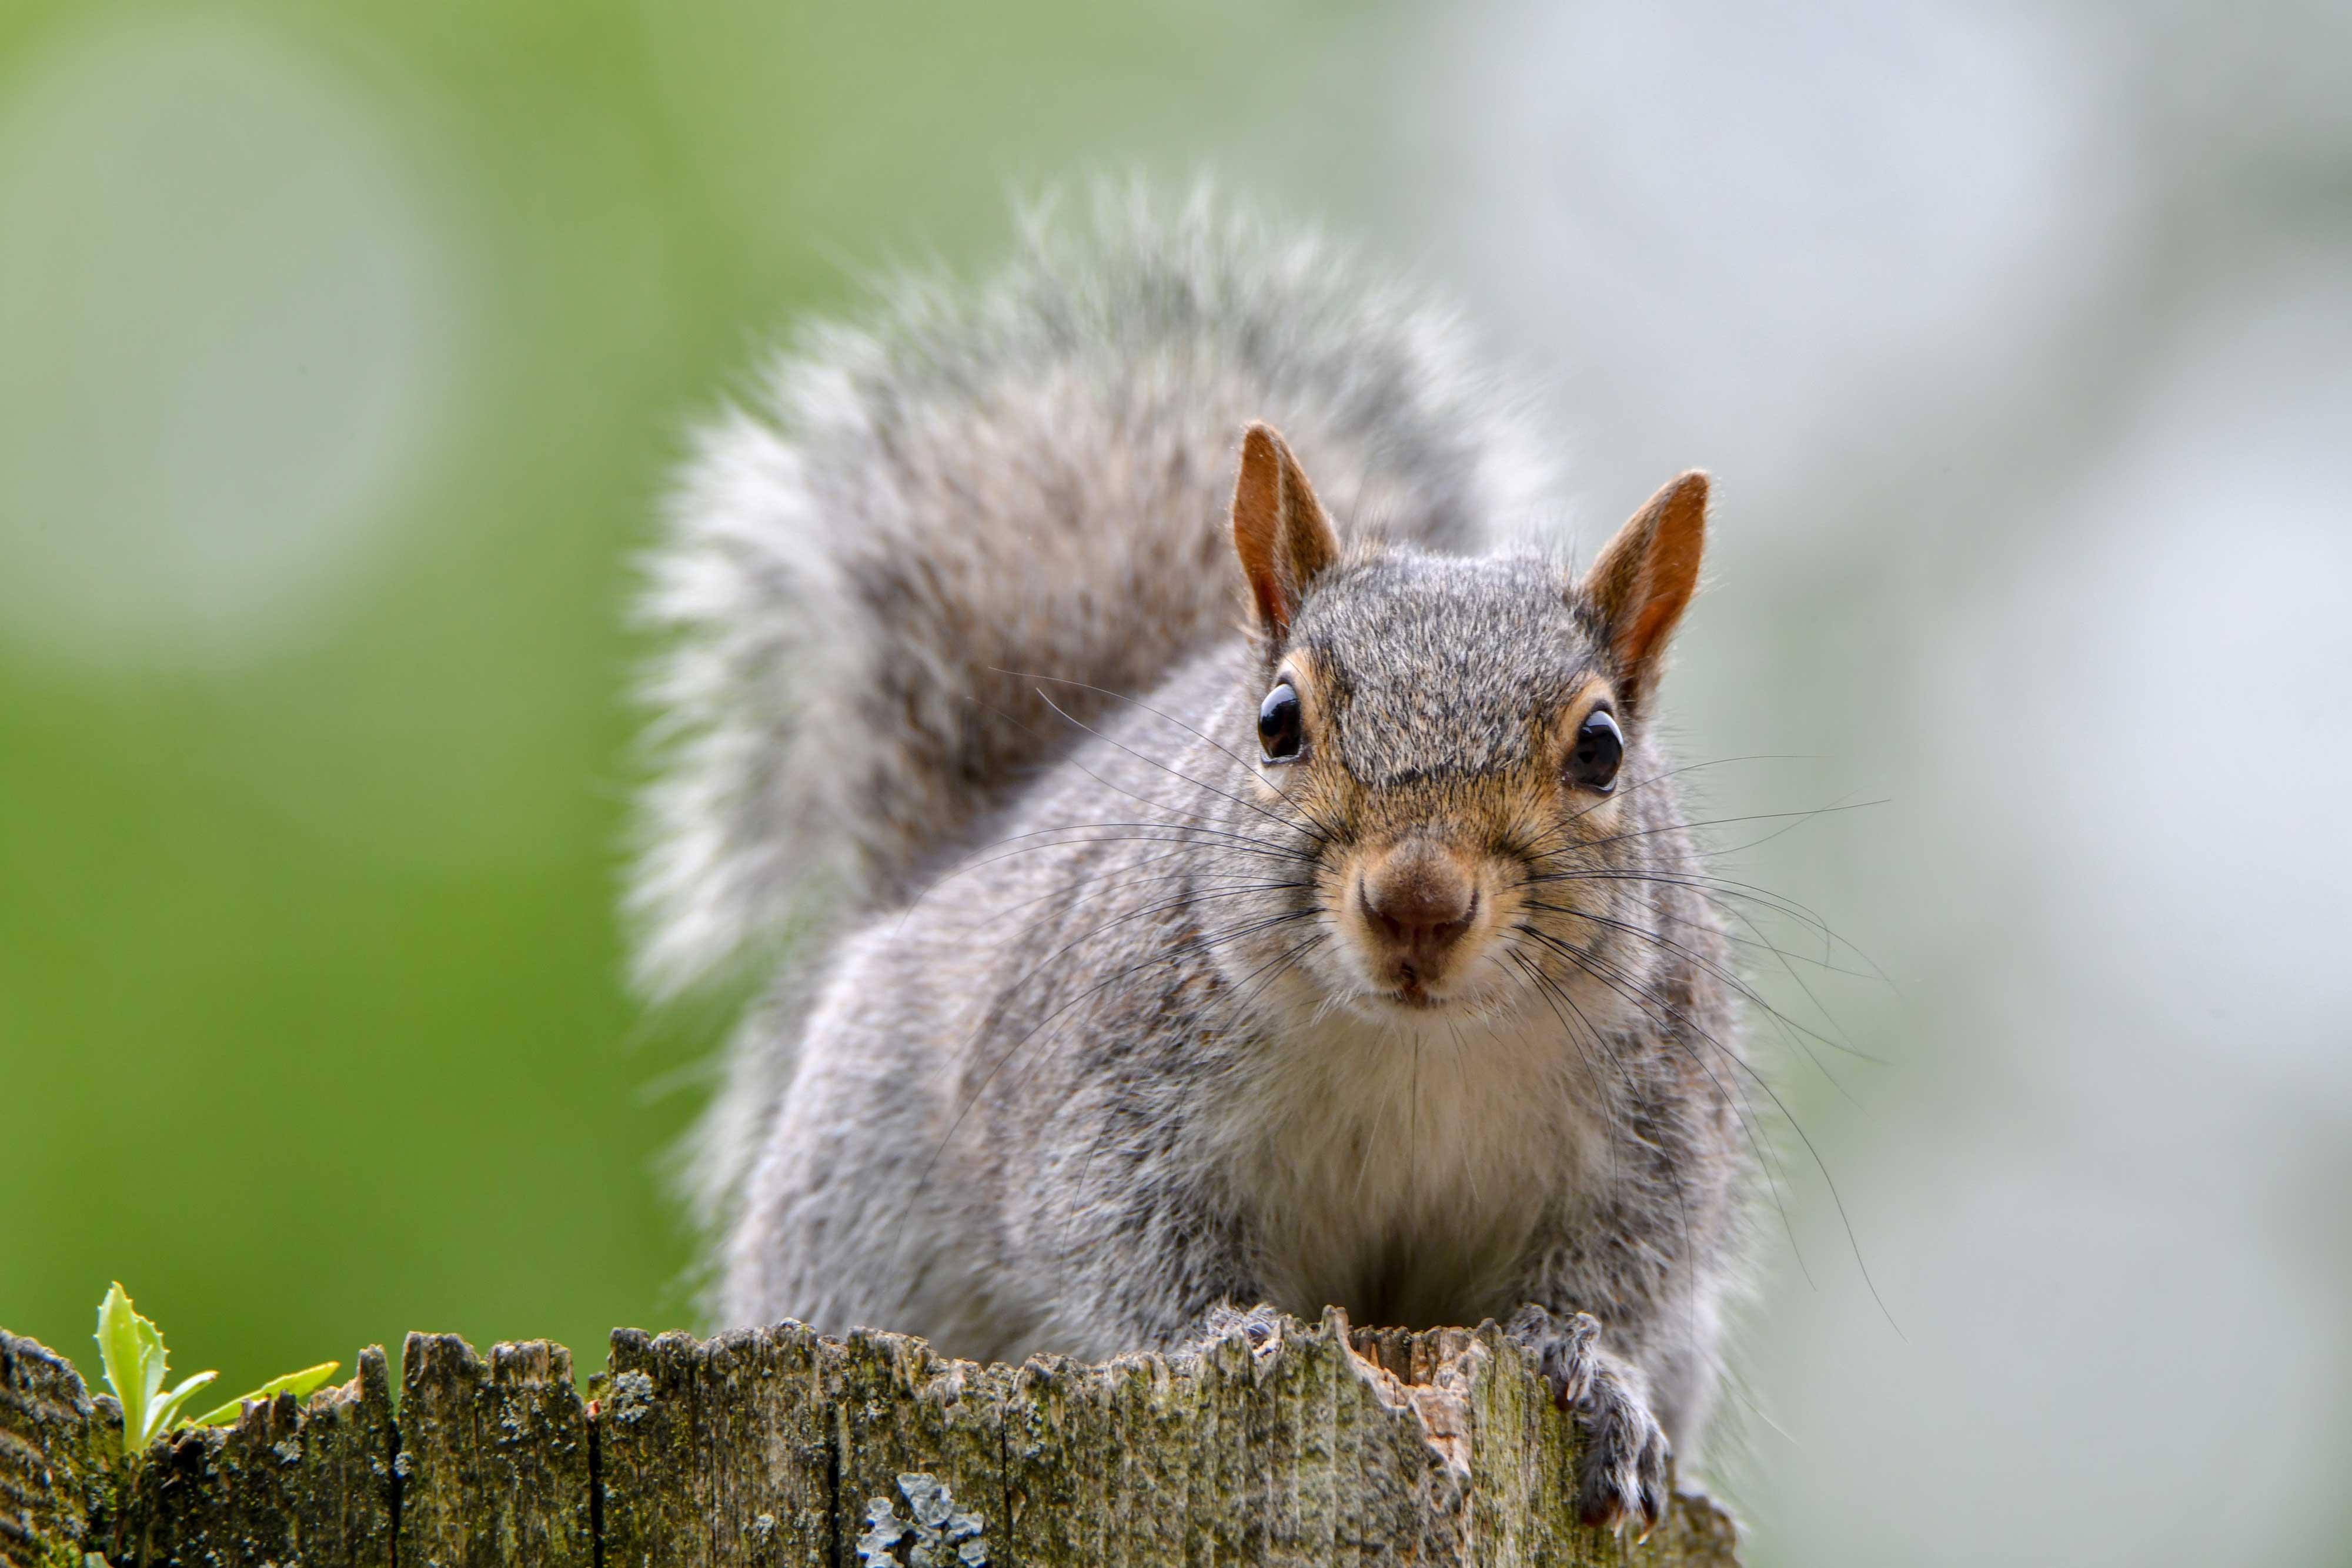 An eastern gray squirrel looking at the camera.